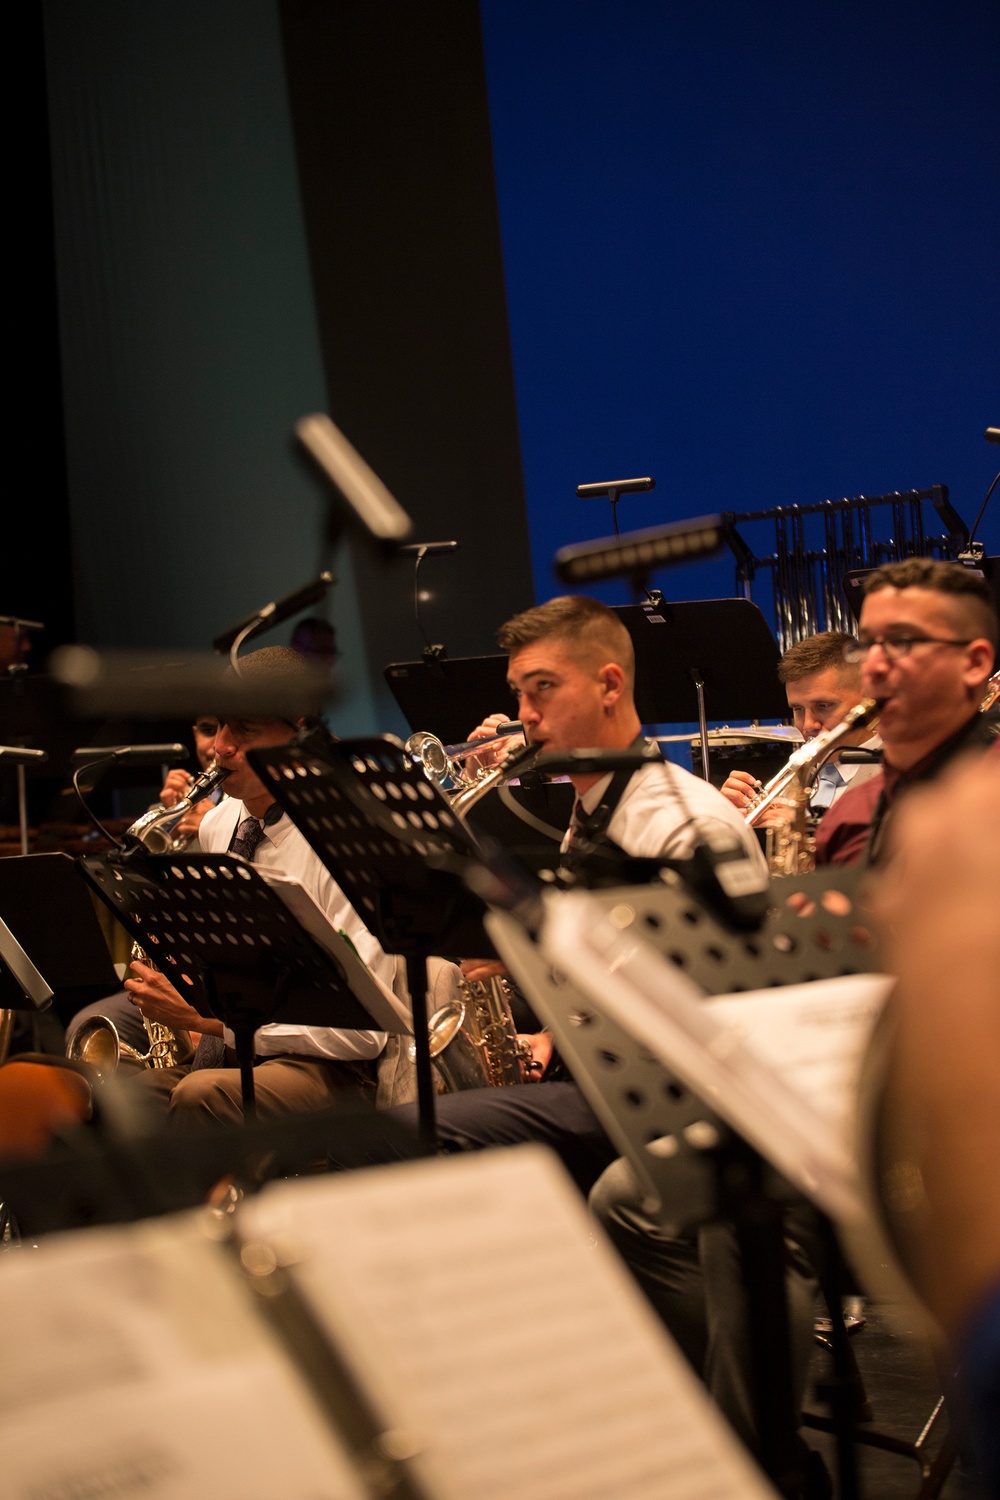 Marine Corps Band New Orleans Performs with Students from the Convservatorio de Musica Puerto Rico